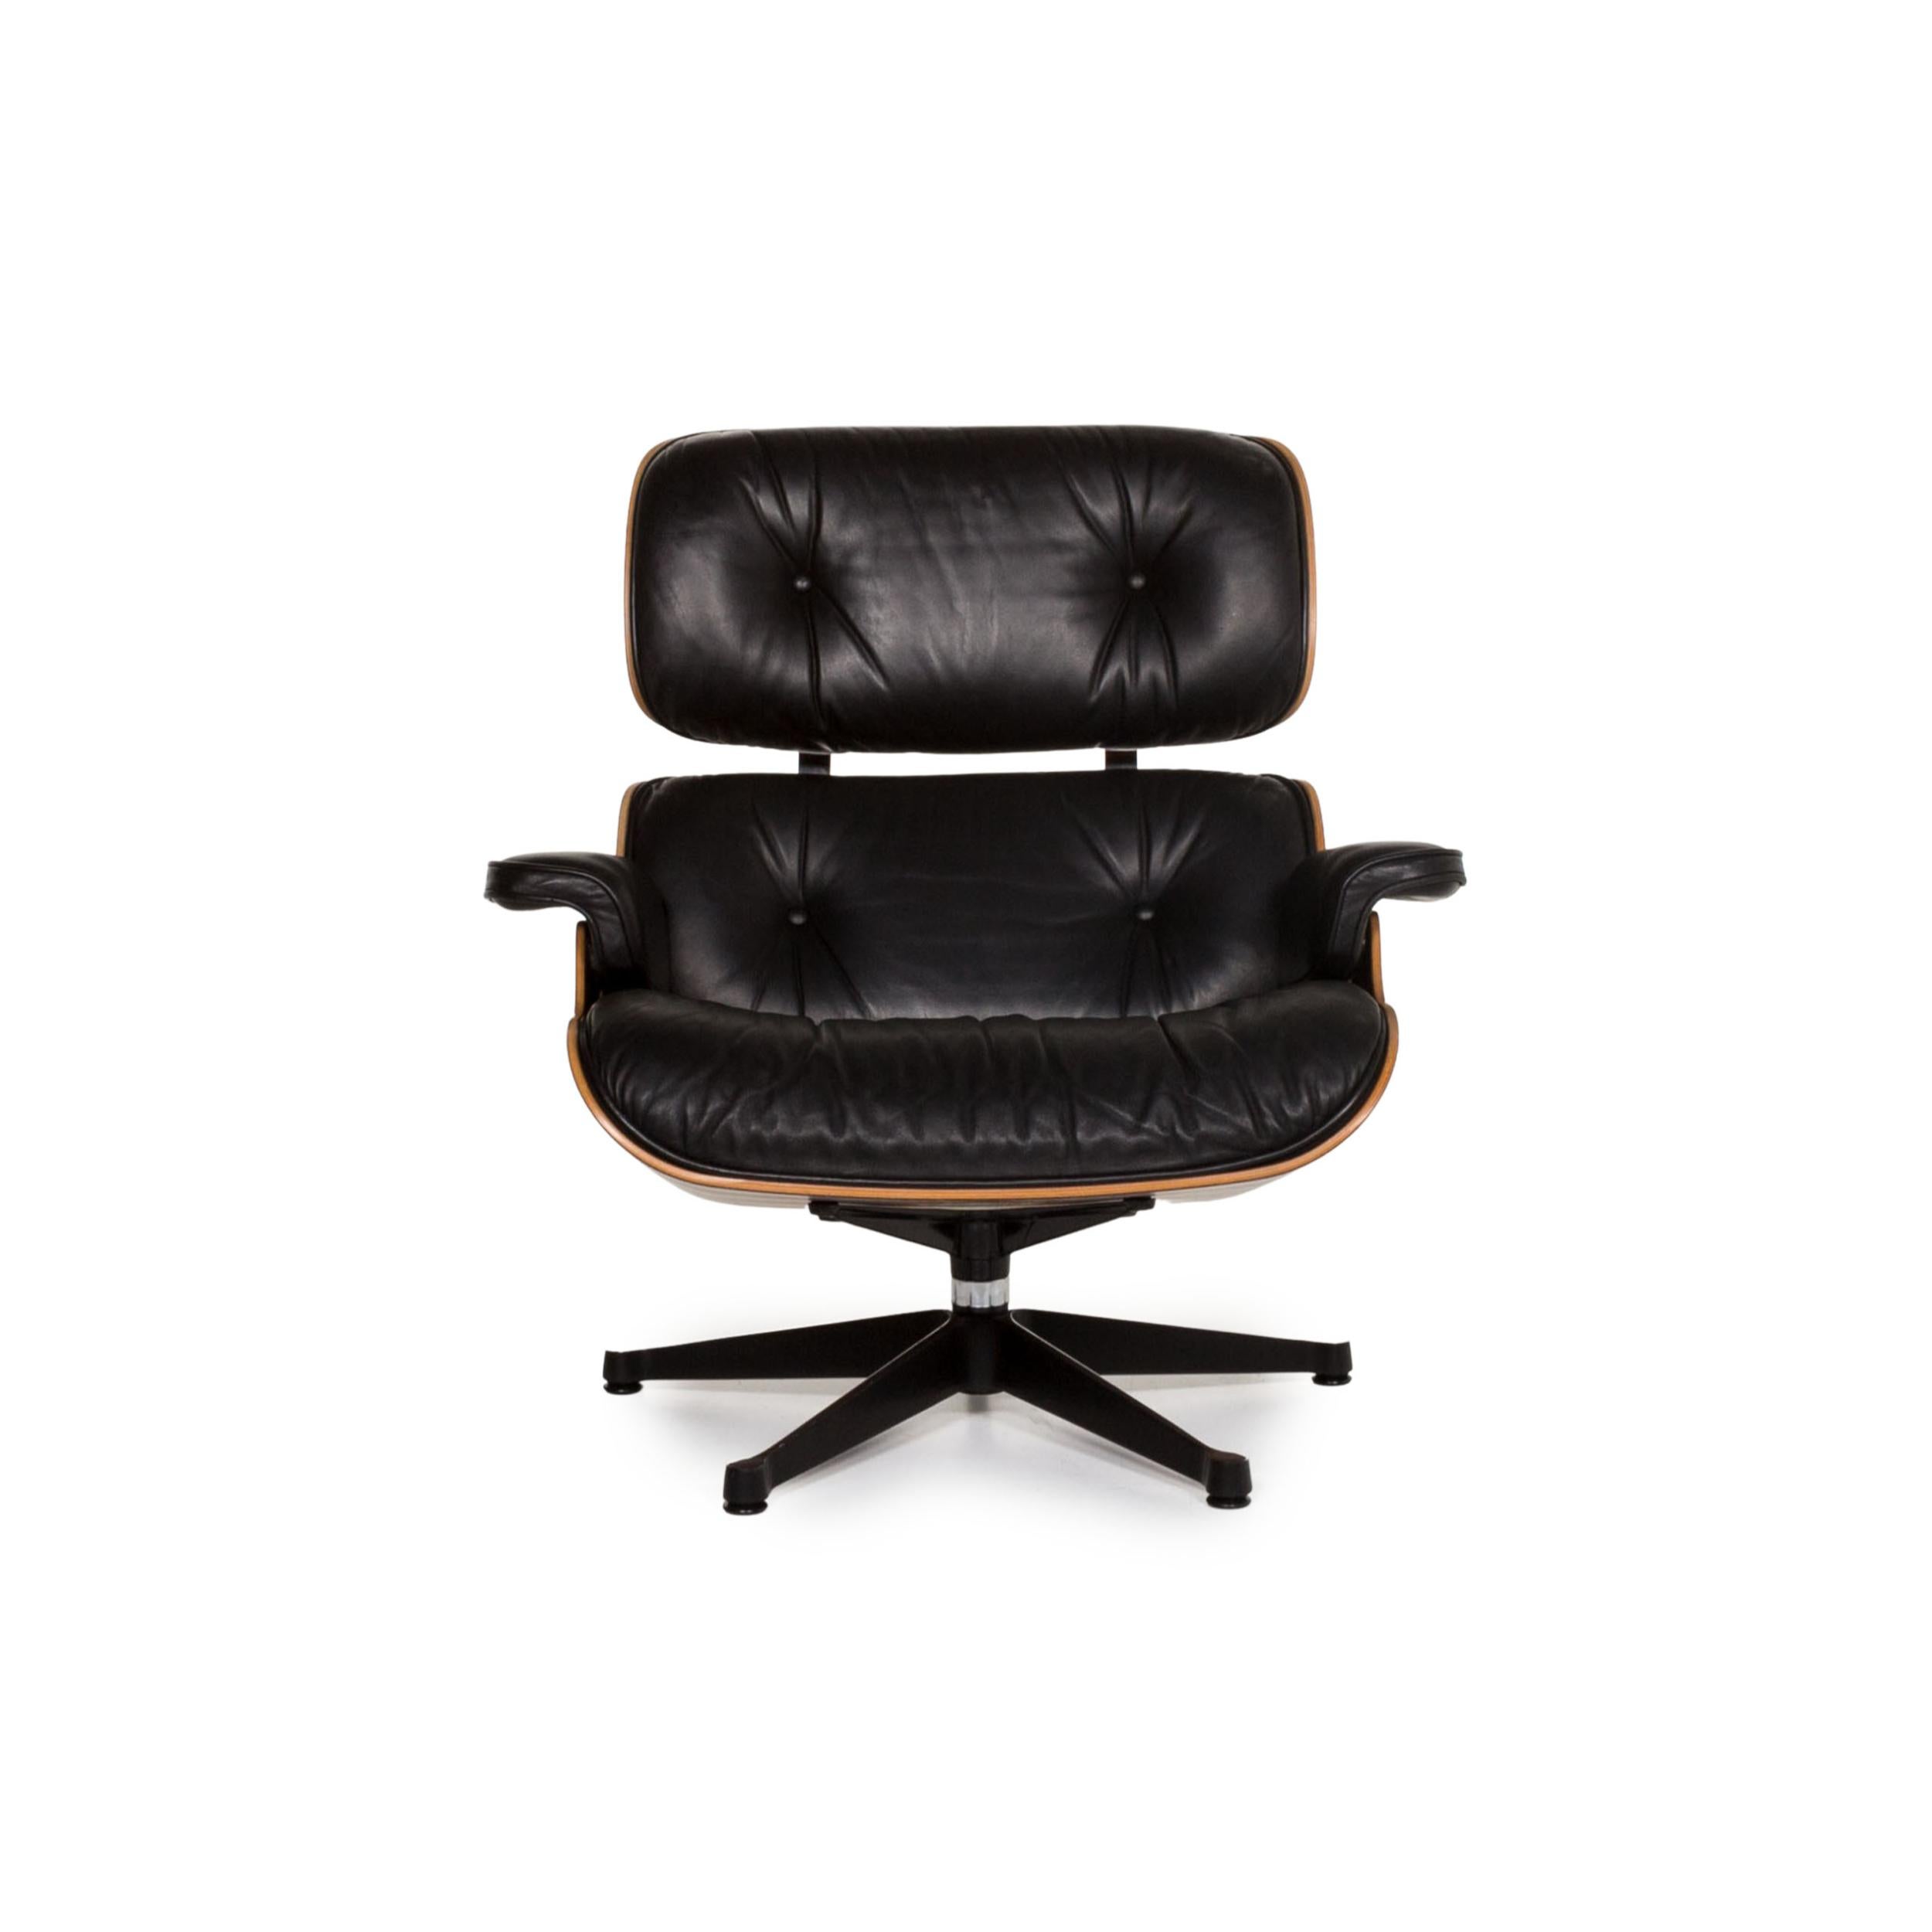 Contemporary Vitra Eames Lounge Chair Leather Armchair Black